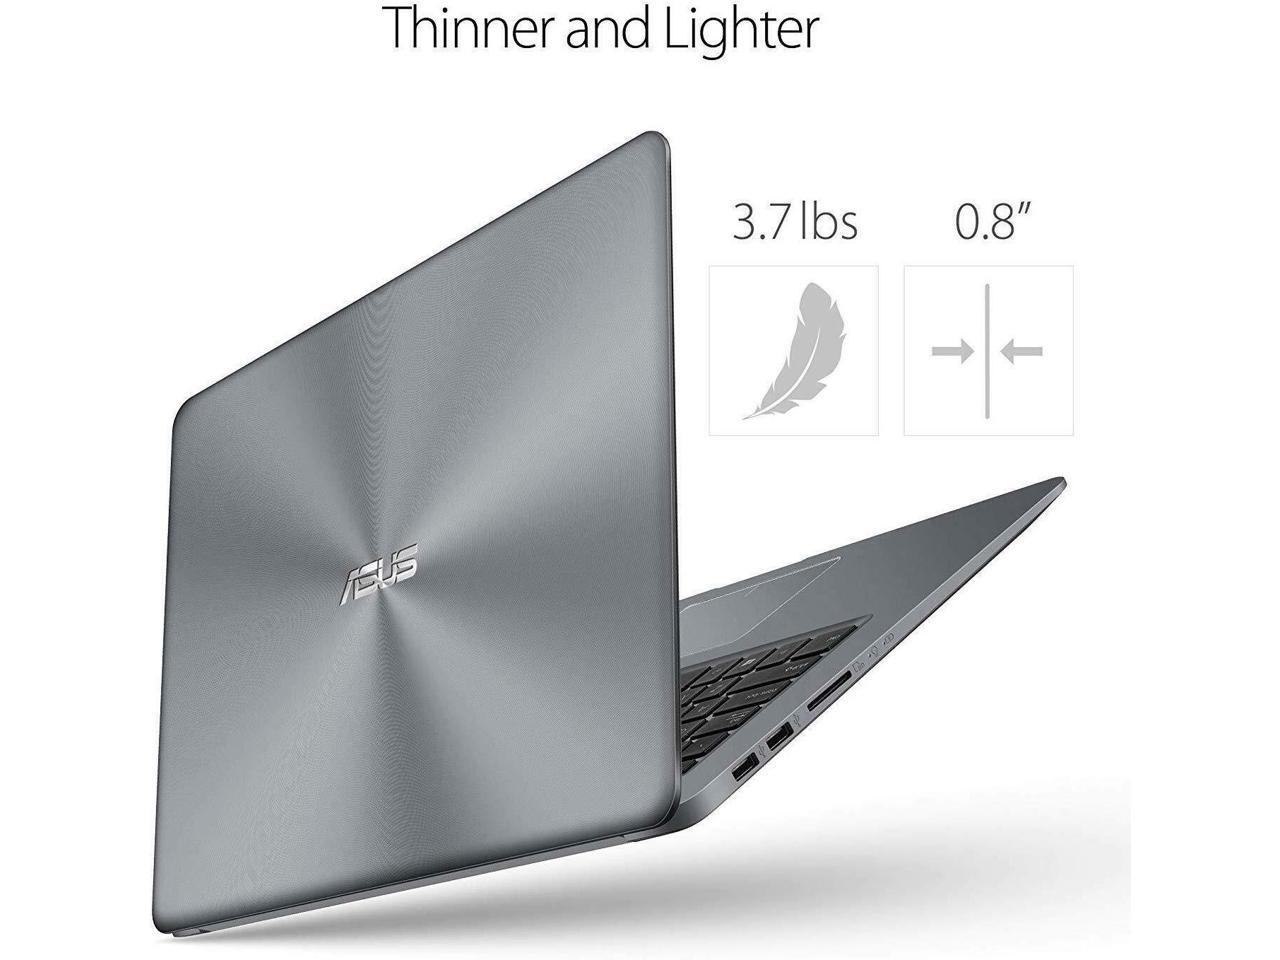 Newest Asus VivoBook Thin & Lightweight Laptop (8G DDR4/128G SSD)|15.6" Full HD(1920x1080) WideView display| AMD Quad Core A12-9720P Processor| Wi-Fi AC|Fingerprint Reader|HDMI |Windows 10 in S Mode